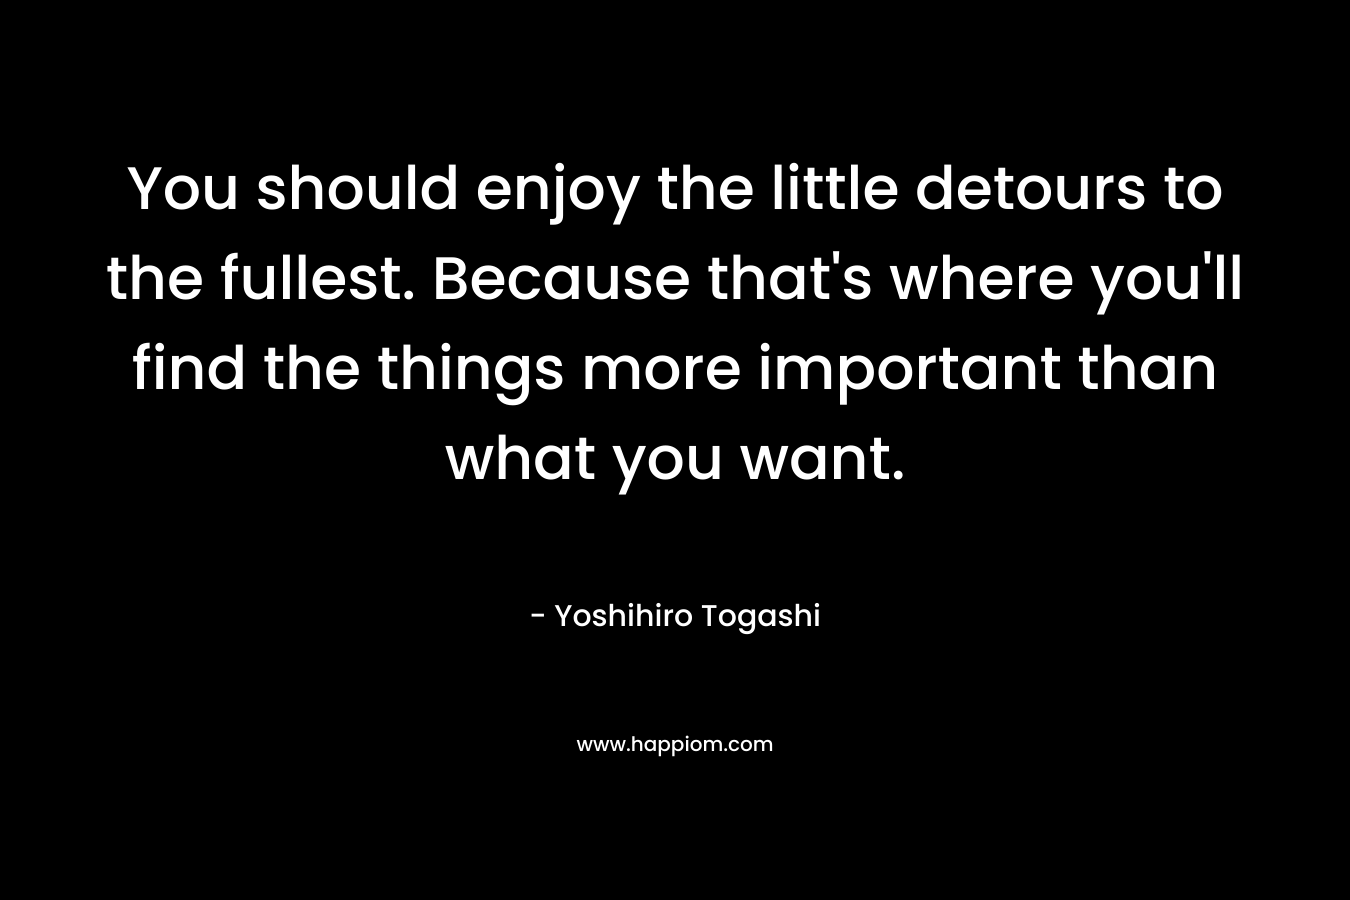 You should enjoy the little detours to the fullest. Because that’s where you’ll find the things more important than what you want. – Yoshihiro Togashi